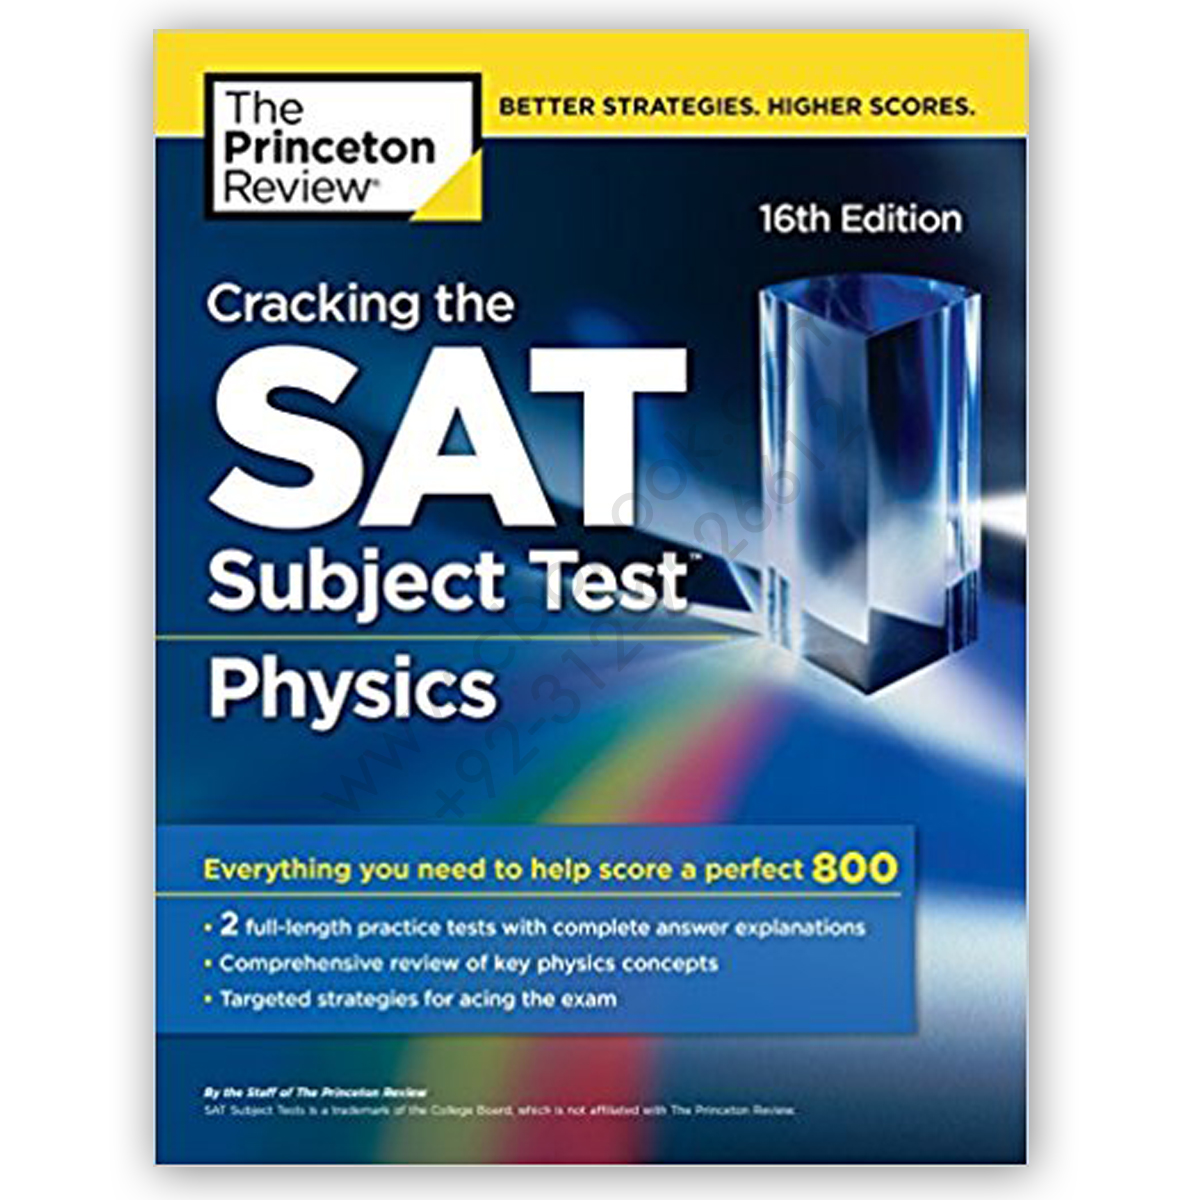 Physics　The　Review　16th　Subject　Edition　Mungal　Princeton　SAT　Bazar　Test　–　The　Cracking